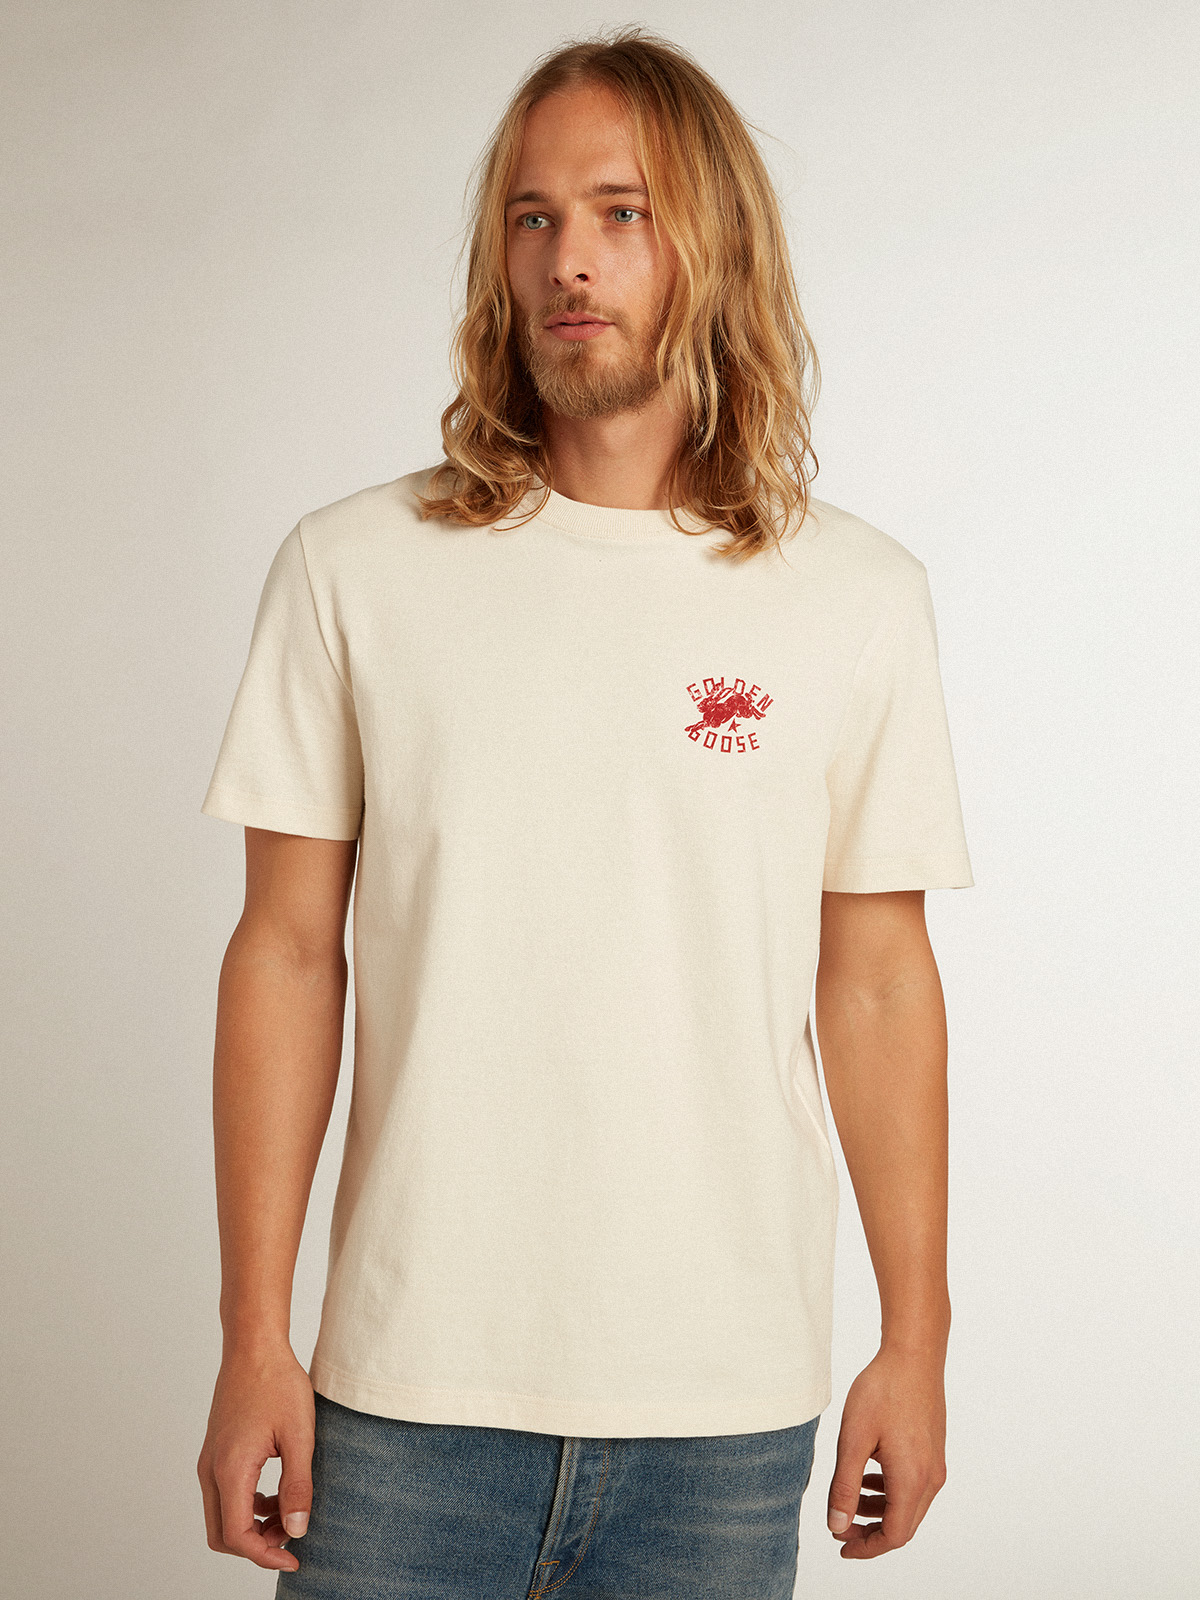 Men's heritage white T-shirt with CNY logo | Golden Goose